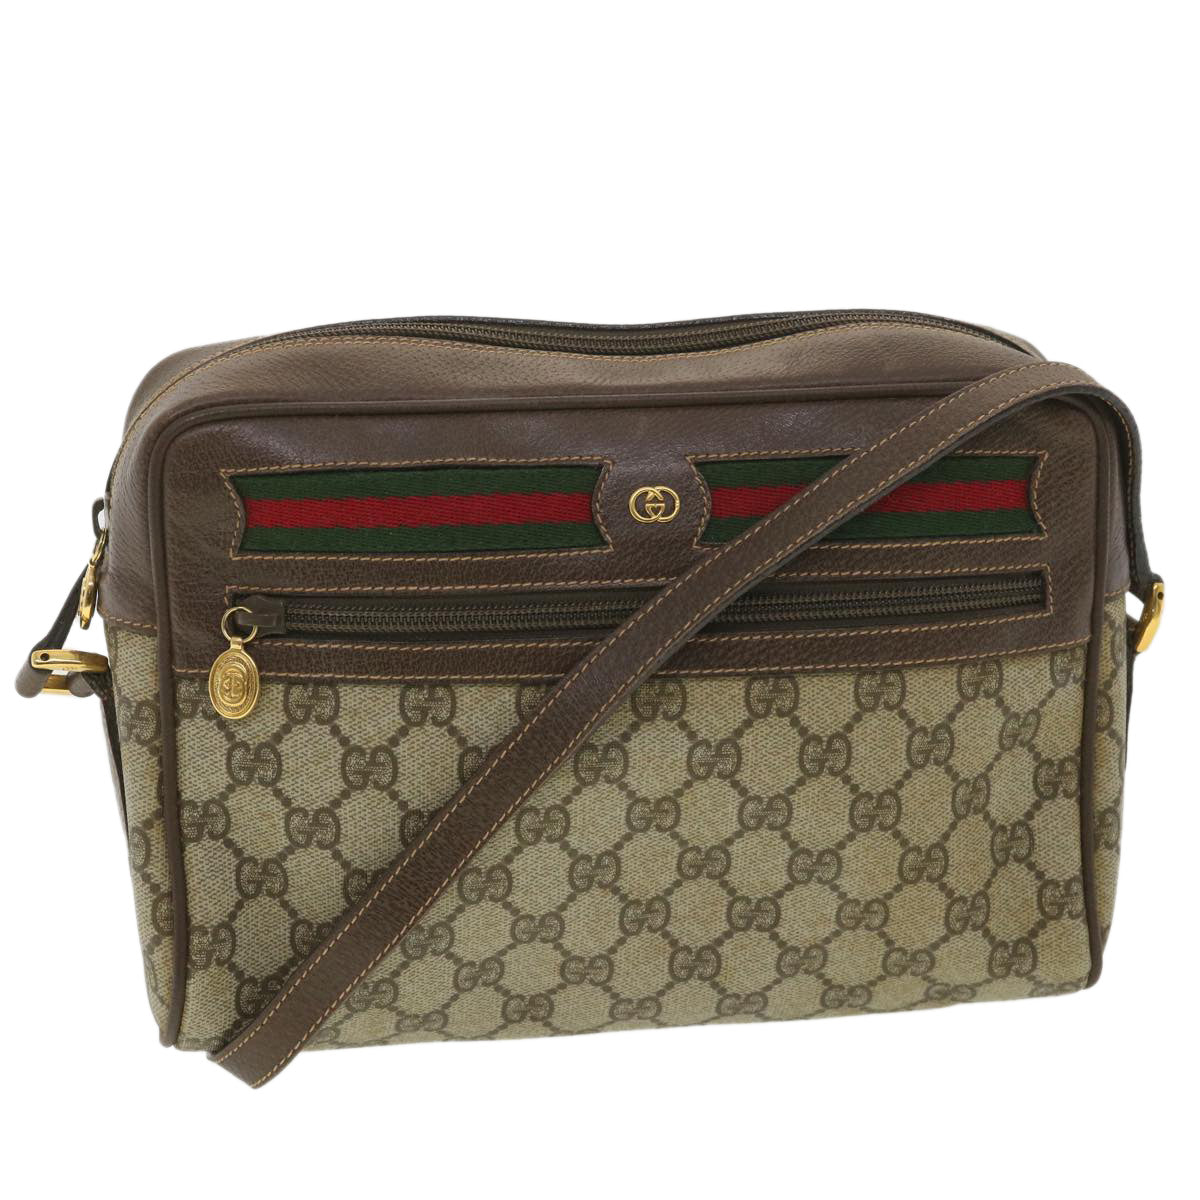 GUCCI GG Canvas Web Sherry Line Shoulder Bag Beige Red Green 001.113 Auth 37792